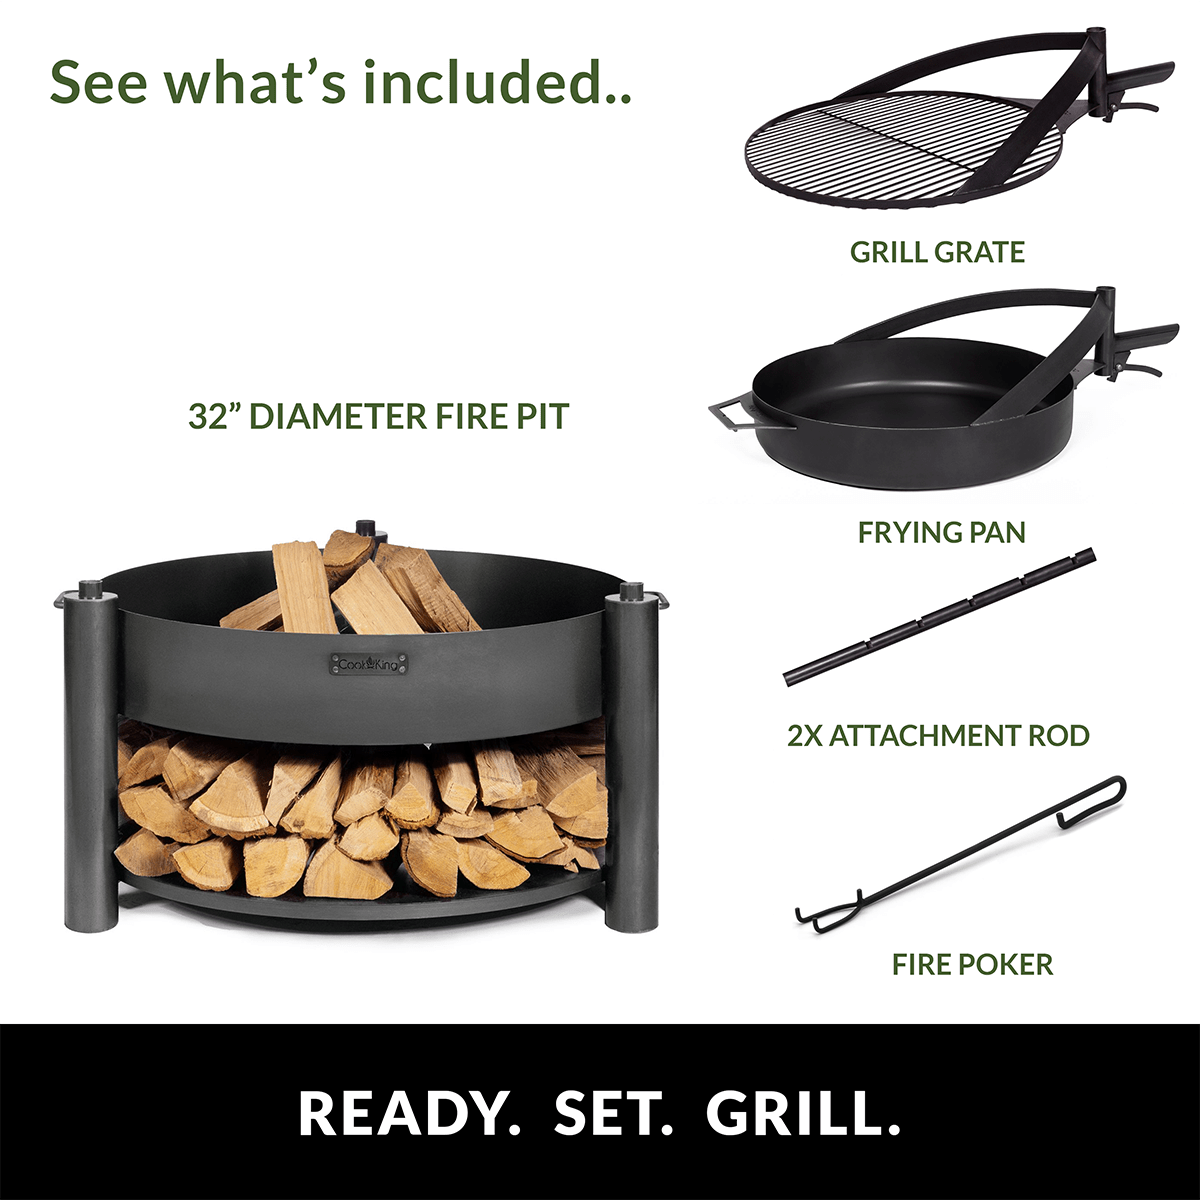 Grand Hearth 32" Grill and Frying Pan Set - Good Directions